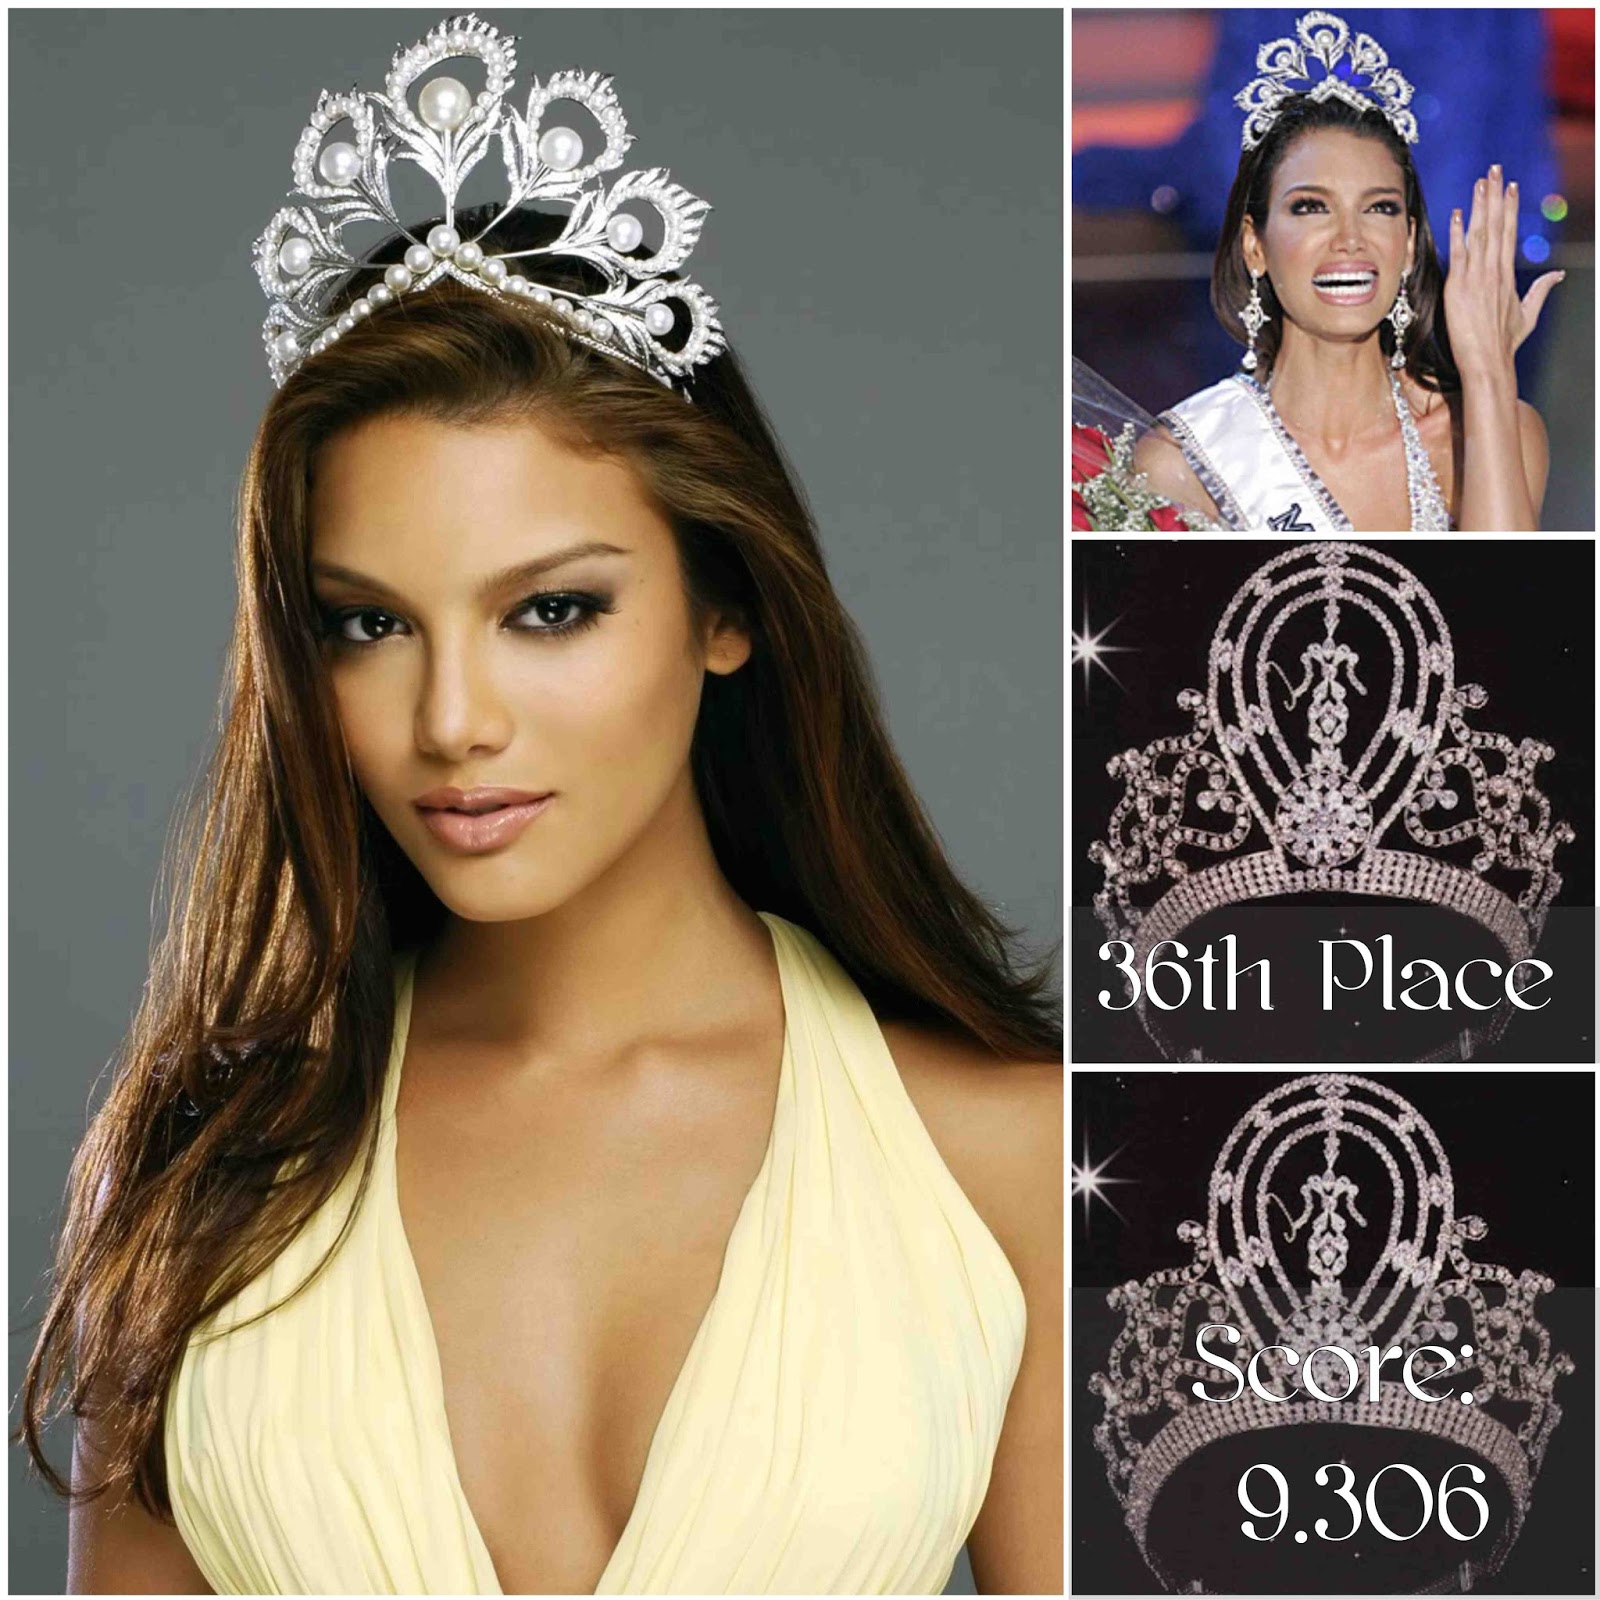 Most Beautiful Miss Universe 1952 2016 38th Place To 35th Place